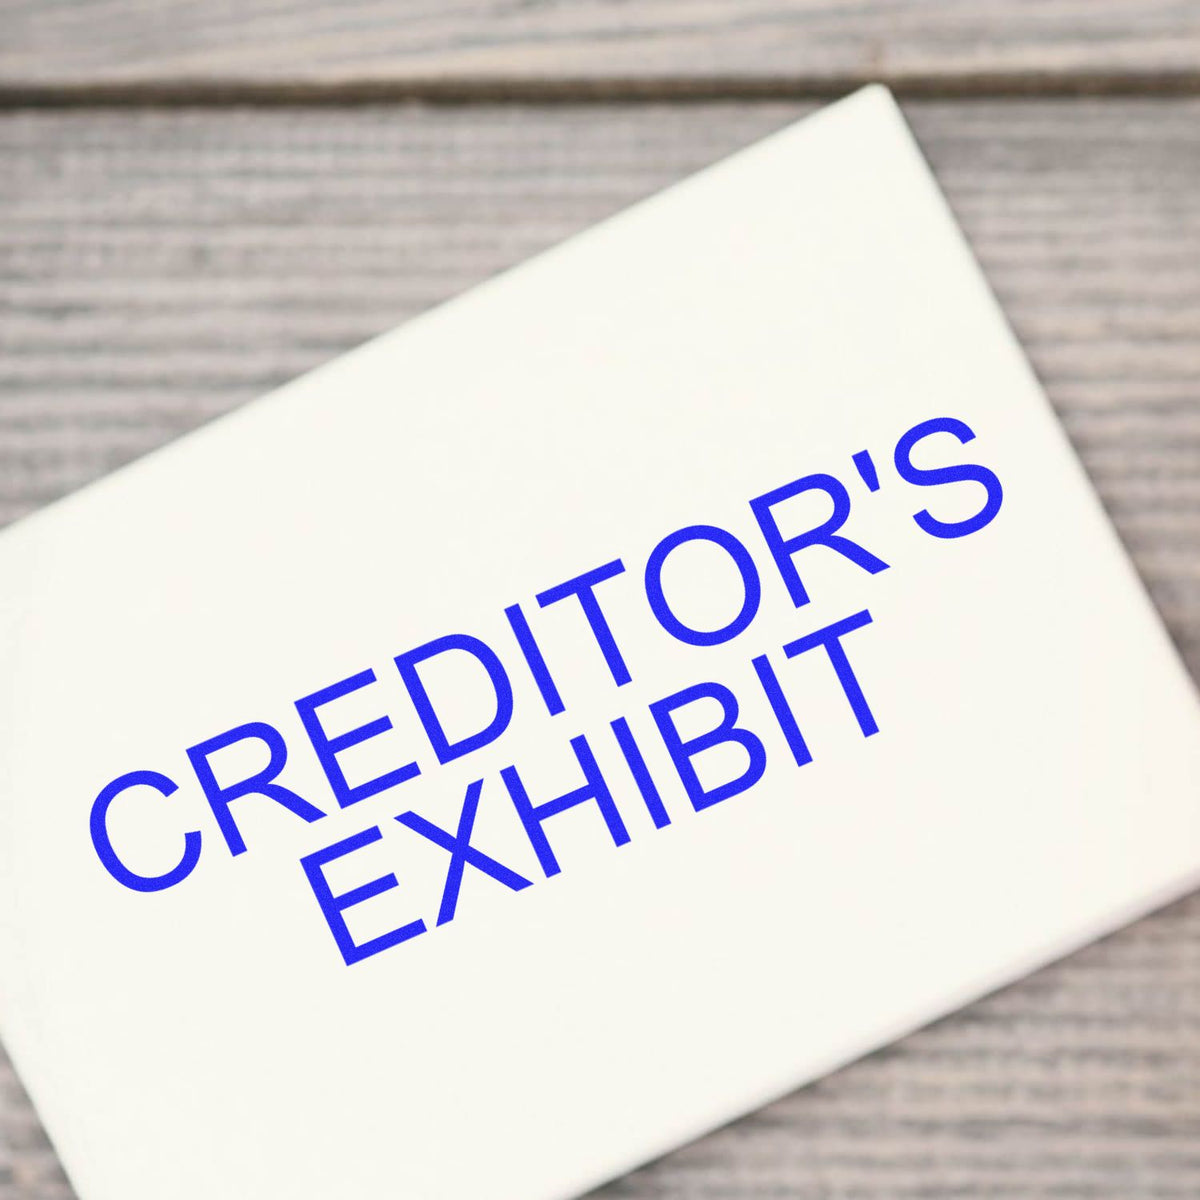 Large Self-Inking Creditors Exhibit Stamp In Use Photo